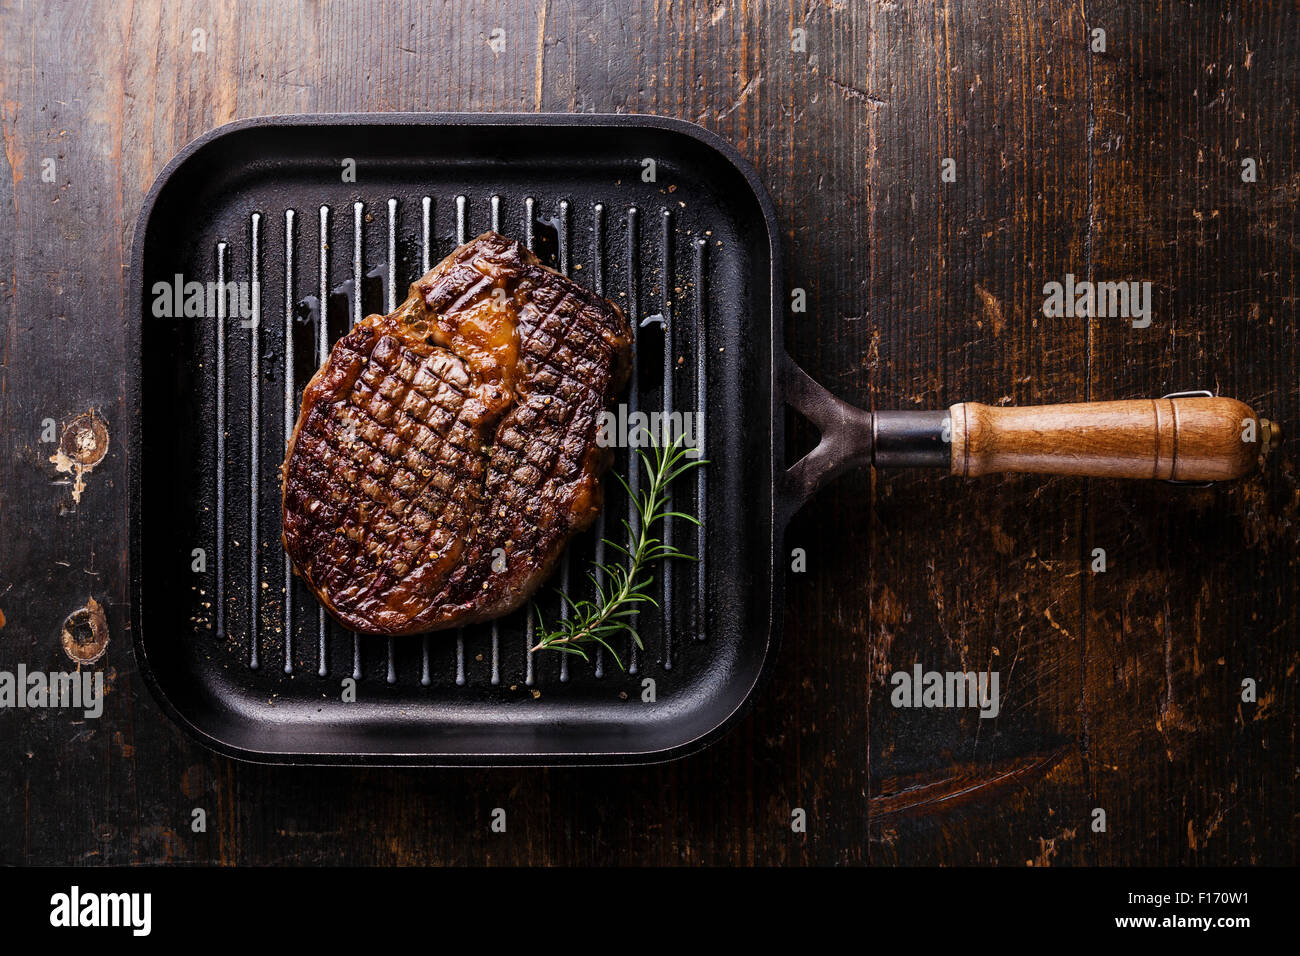 Grilled Black Angus Steak Ribeye on grill pan on wooden background Stock Photo